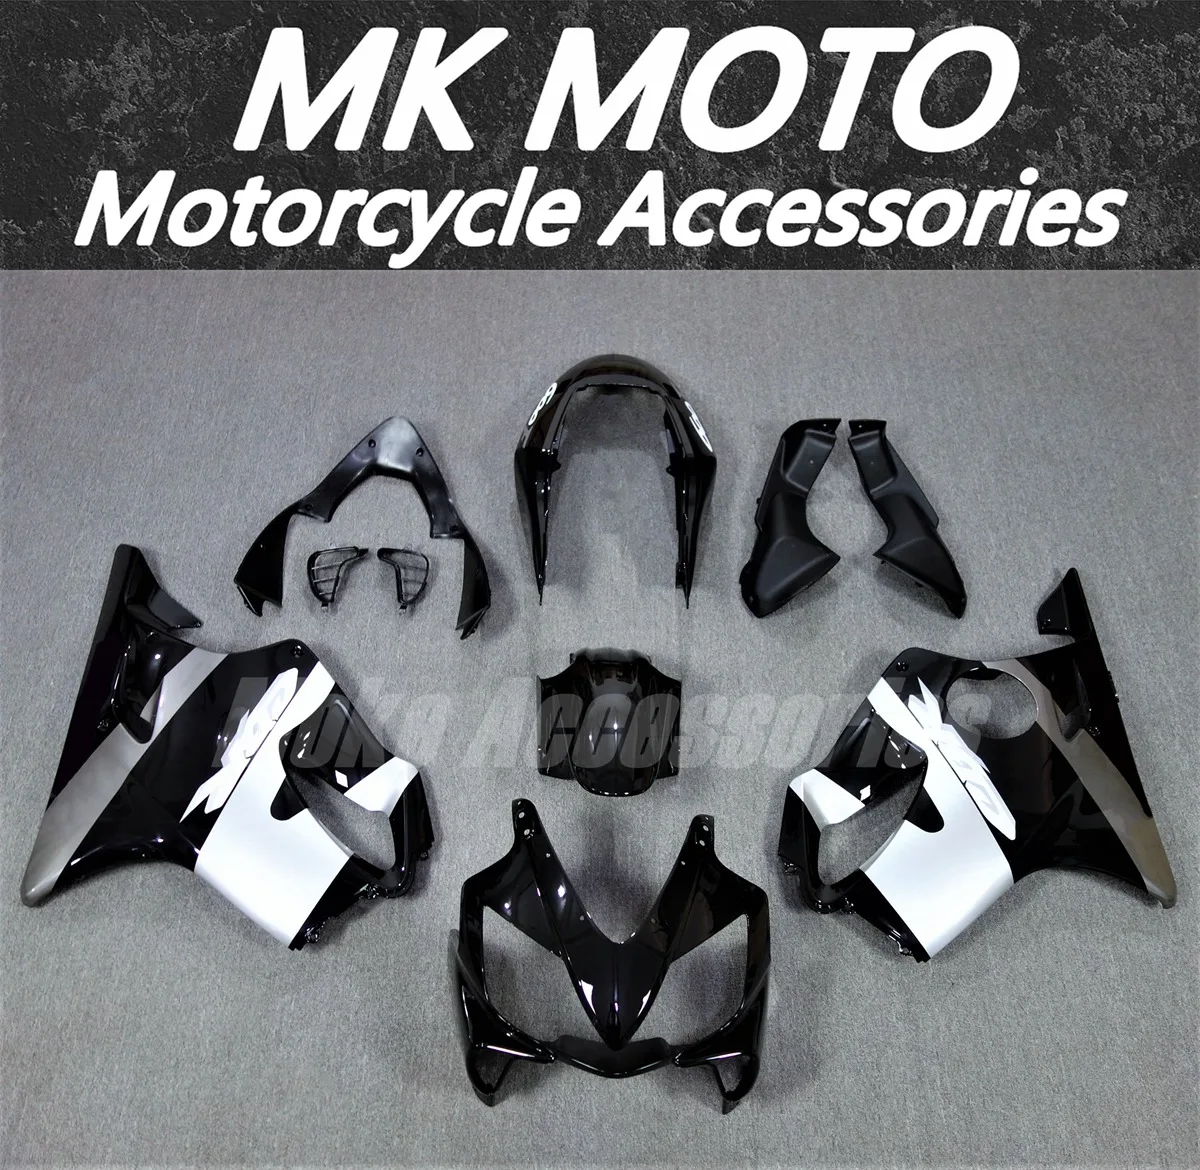 

Motorcycle Fairings Kit Fit For Cbr600f F4i 2004 2005 2006 Bodywork Set High Quality Abs Injection Bright Black Silver